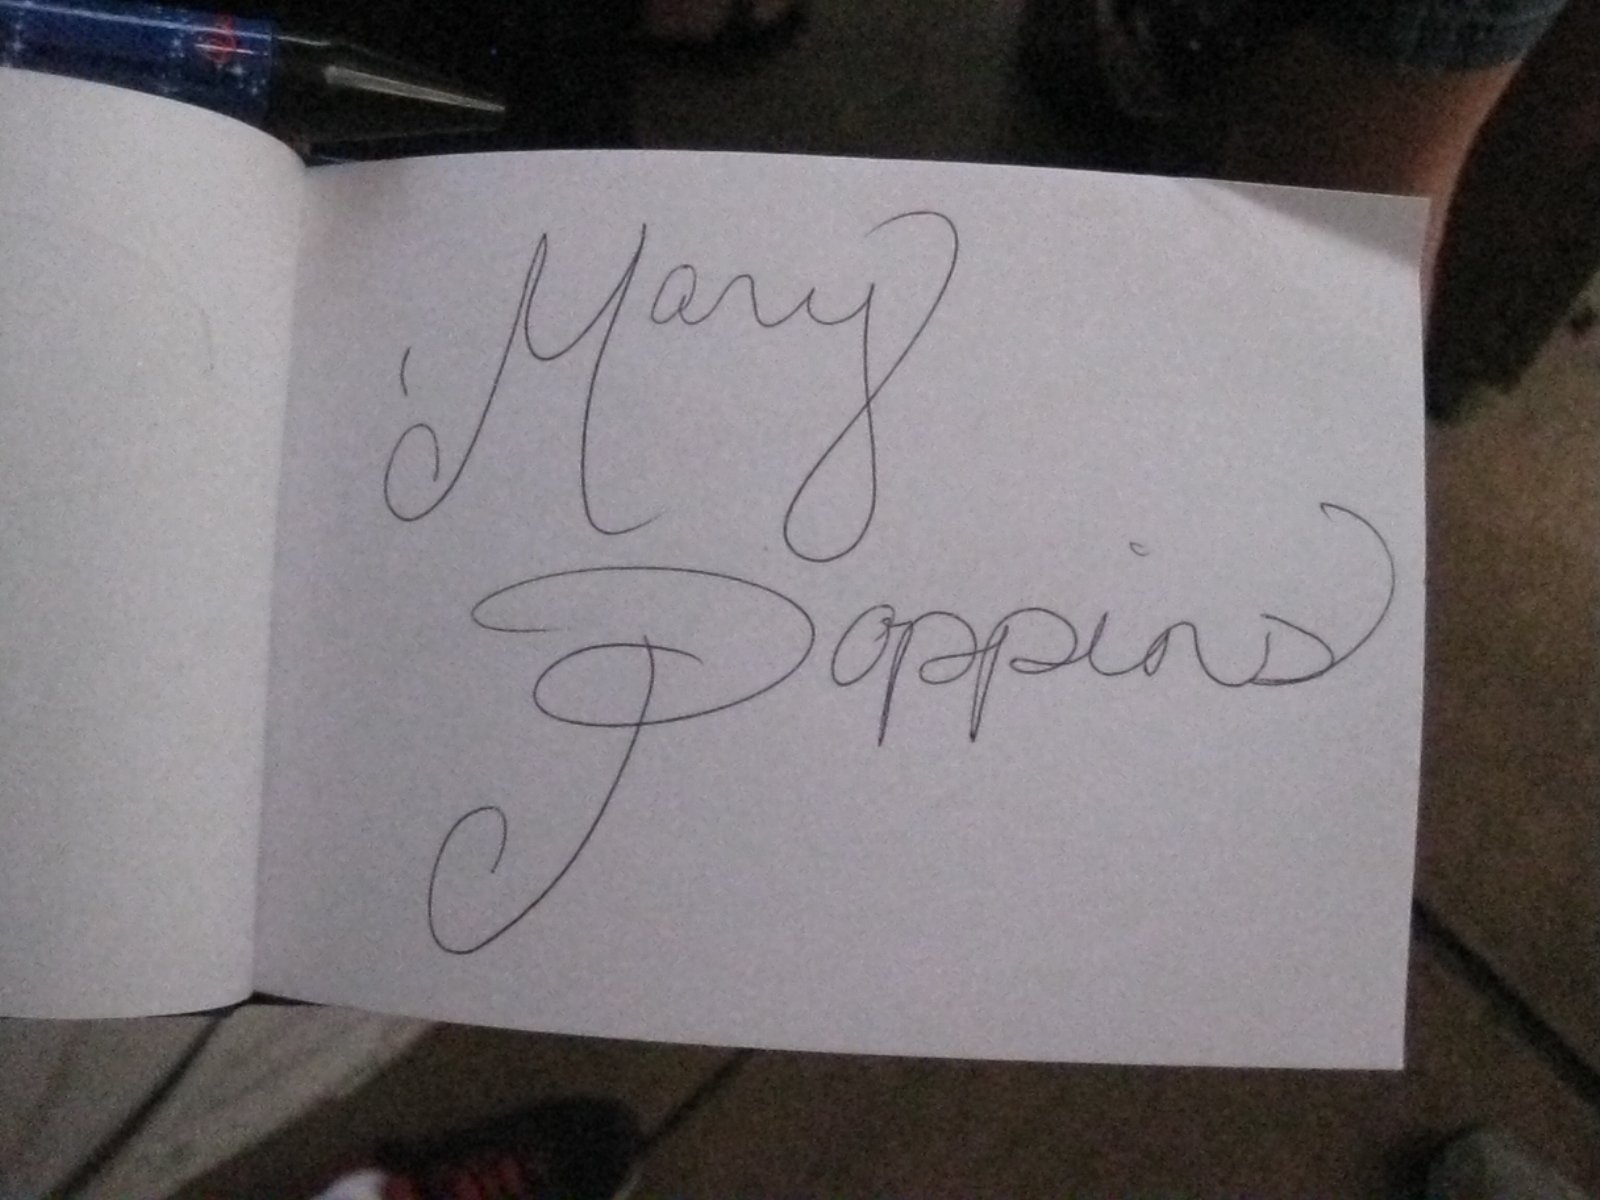 6 Mary Poppins Autograph